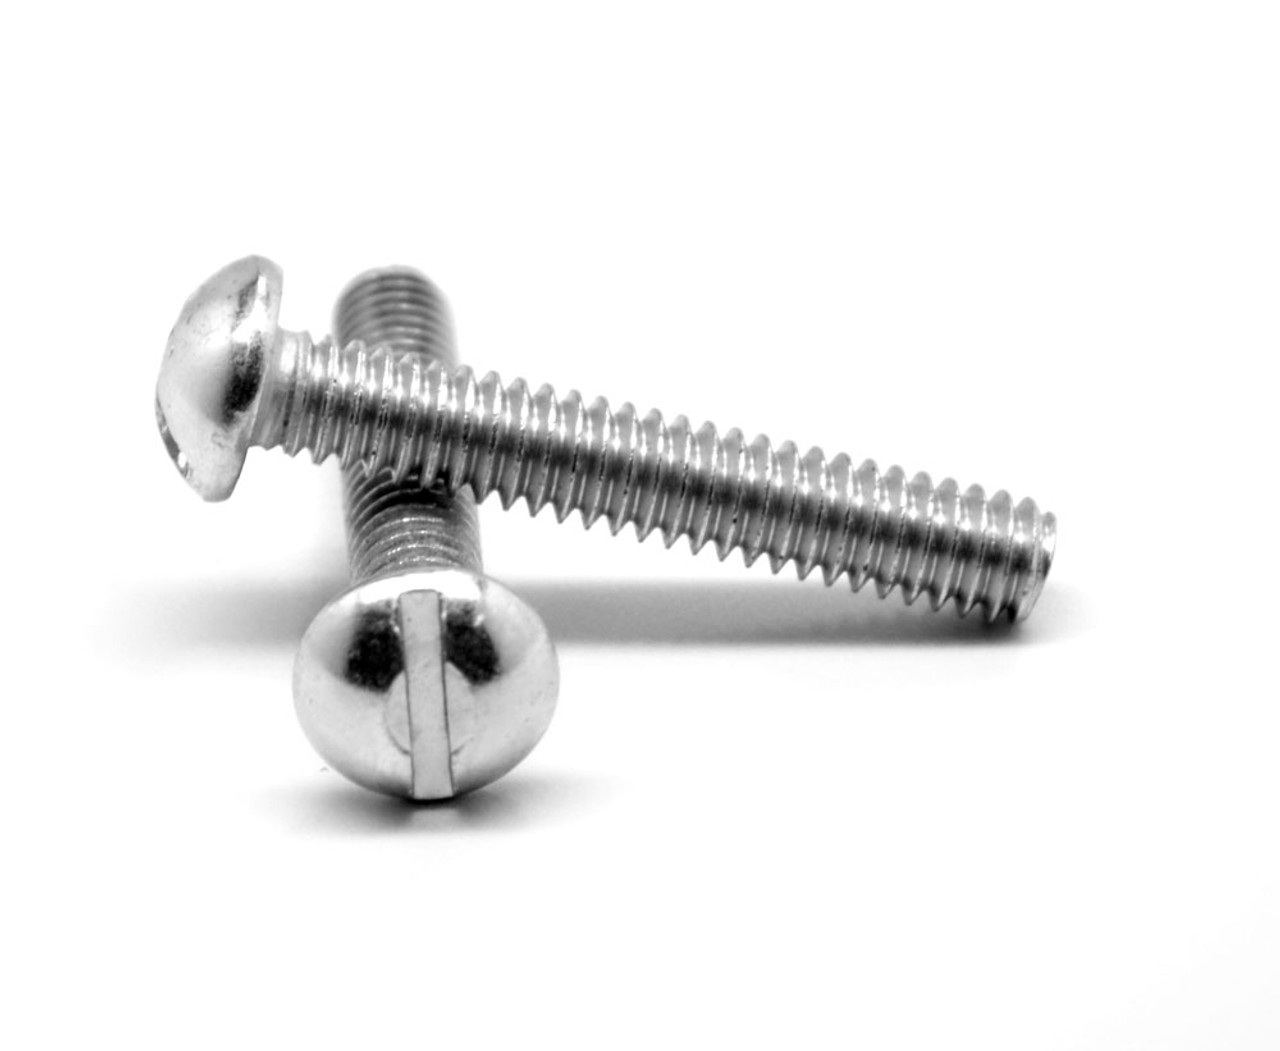 5/16"-18 x 2 1/2" (FT) Coarse Thread Machine Screw Slotted Round Head Low Carbon Steel Zinc Plated